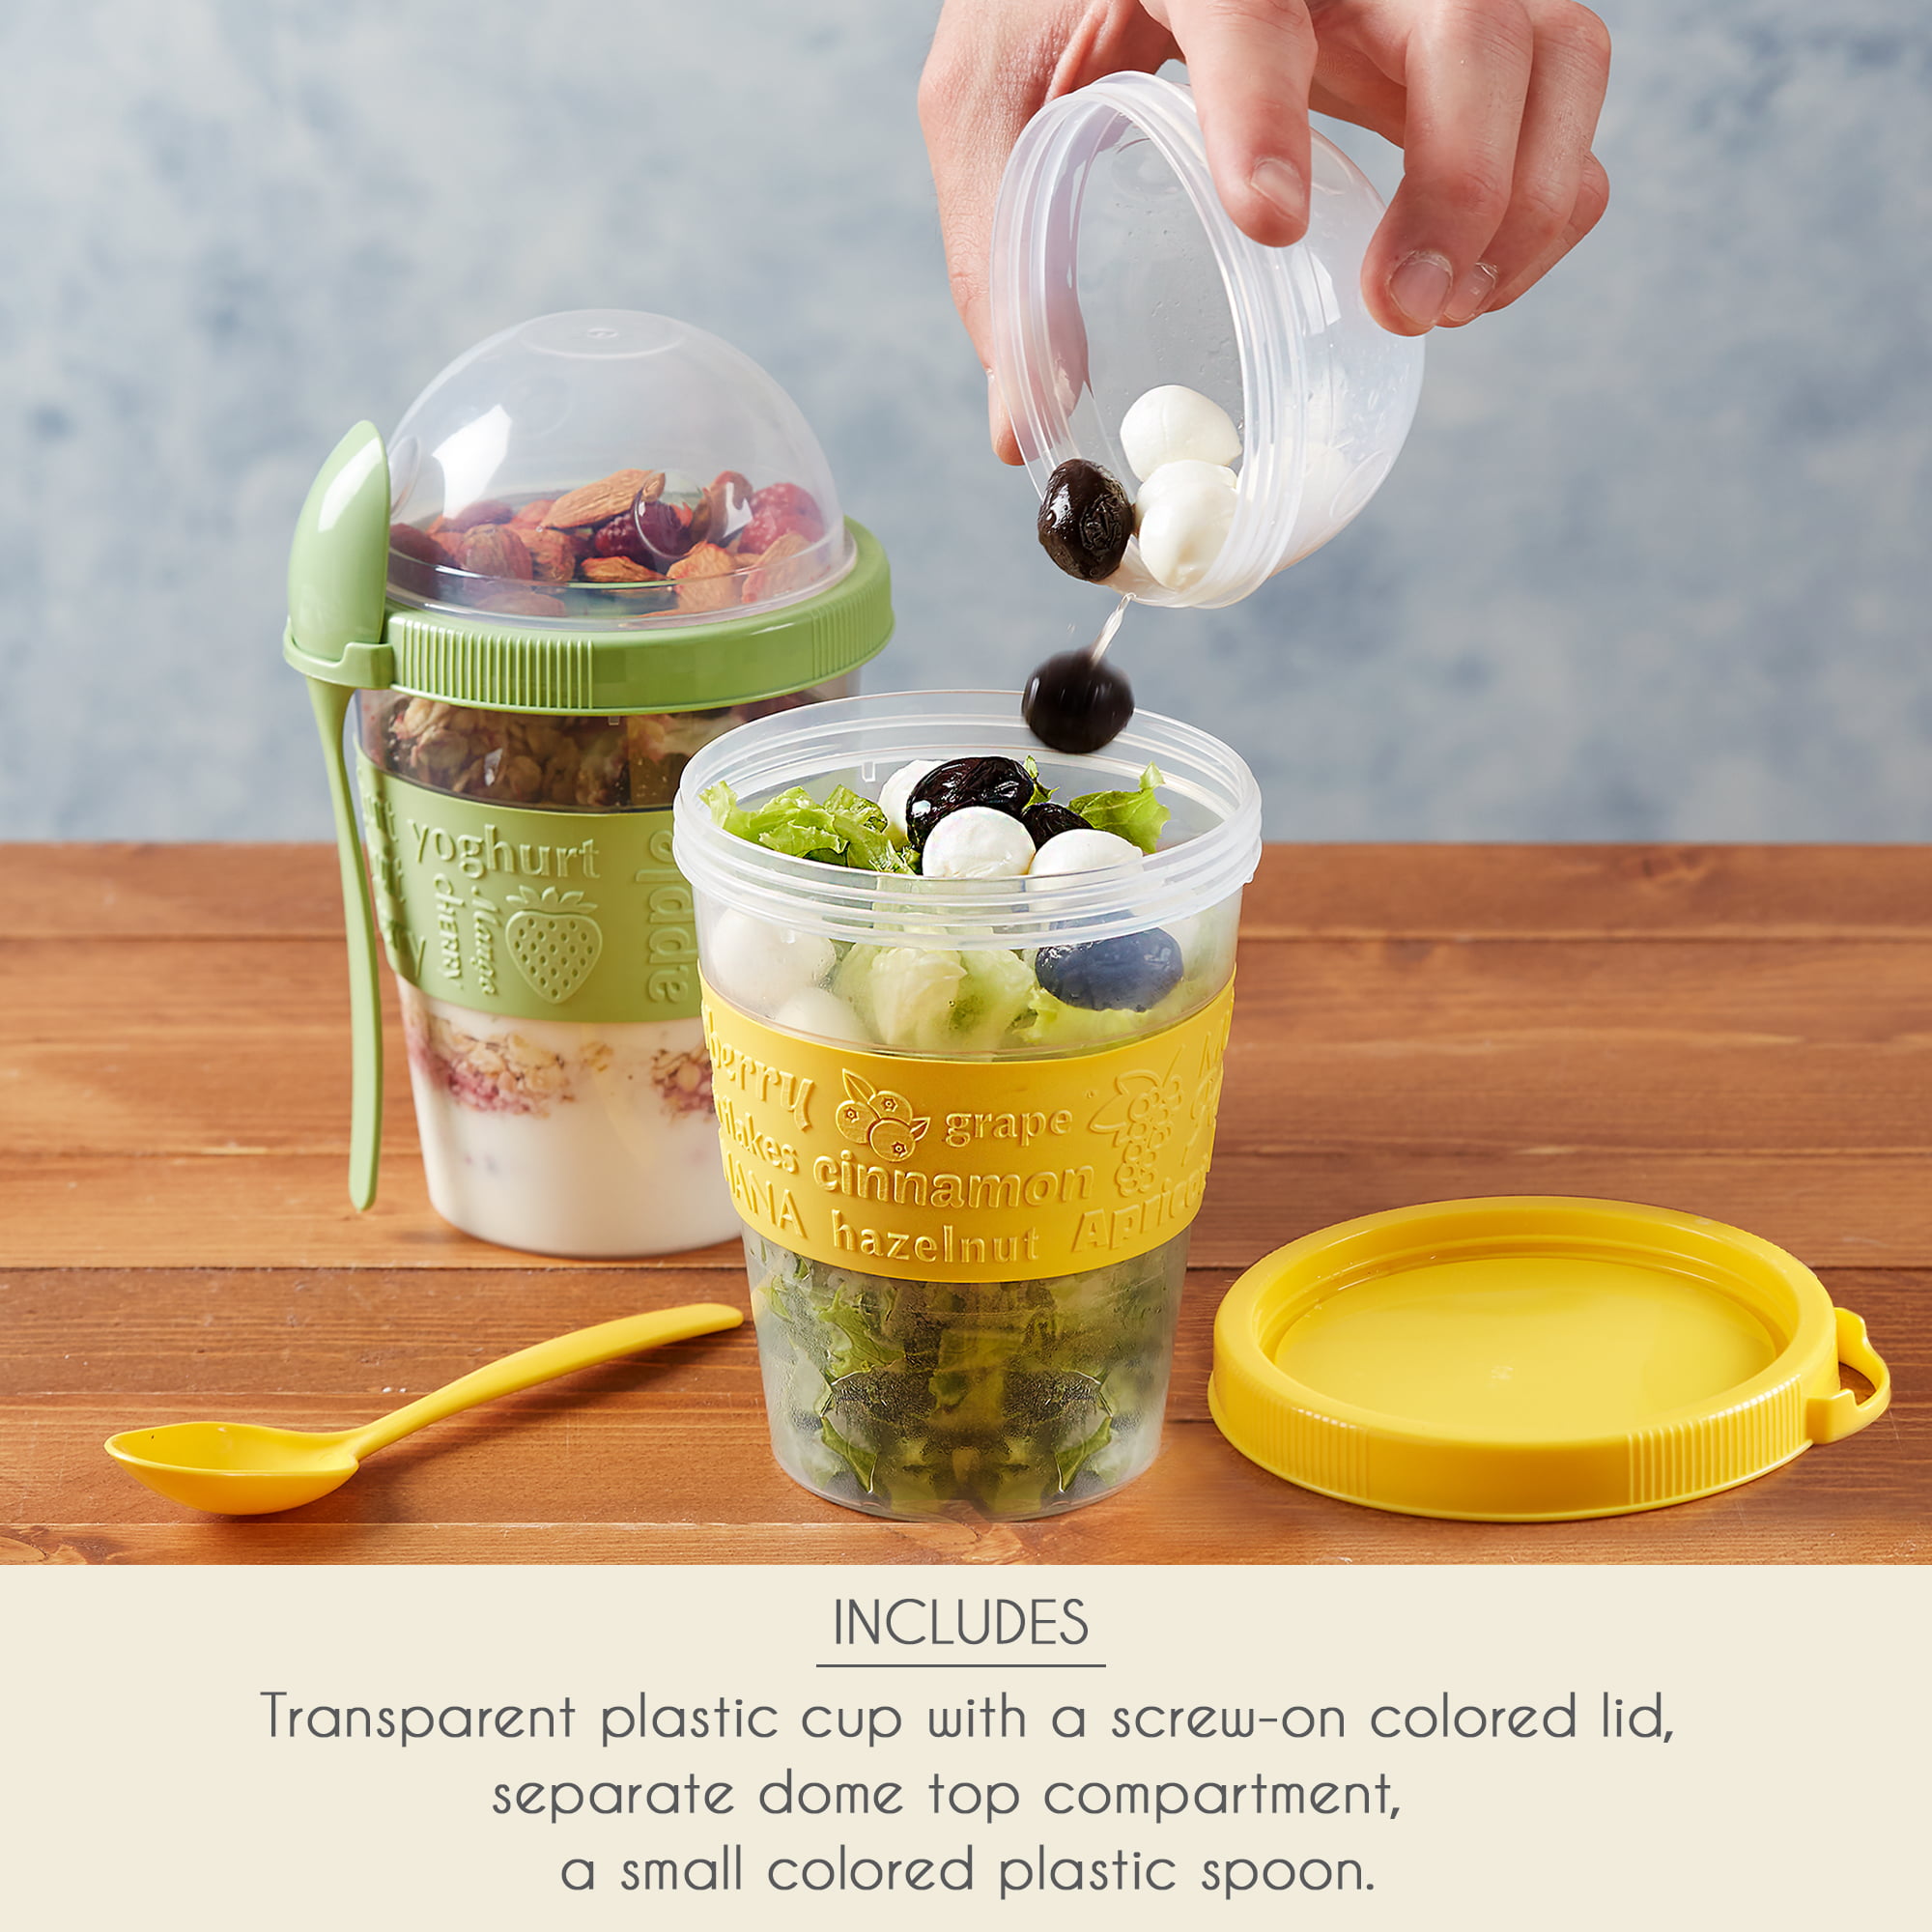 Crystalia Yogurt Parfait Cups with Lids, Large Breakfast On the Go Plastic  Bowls with Topping Cereal Oatmeal Salad or Fruit Container with Spoon for